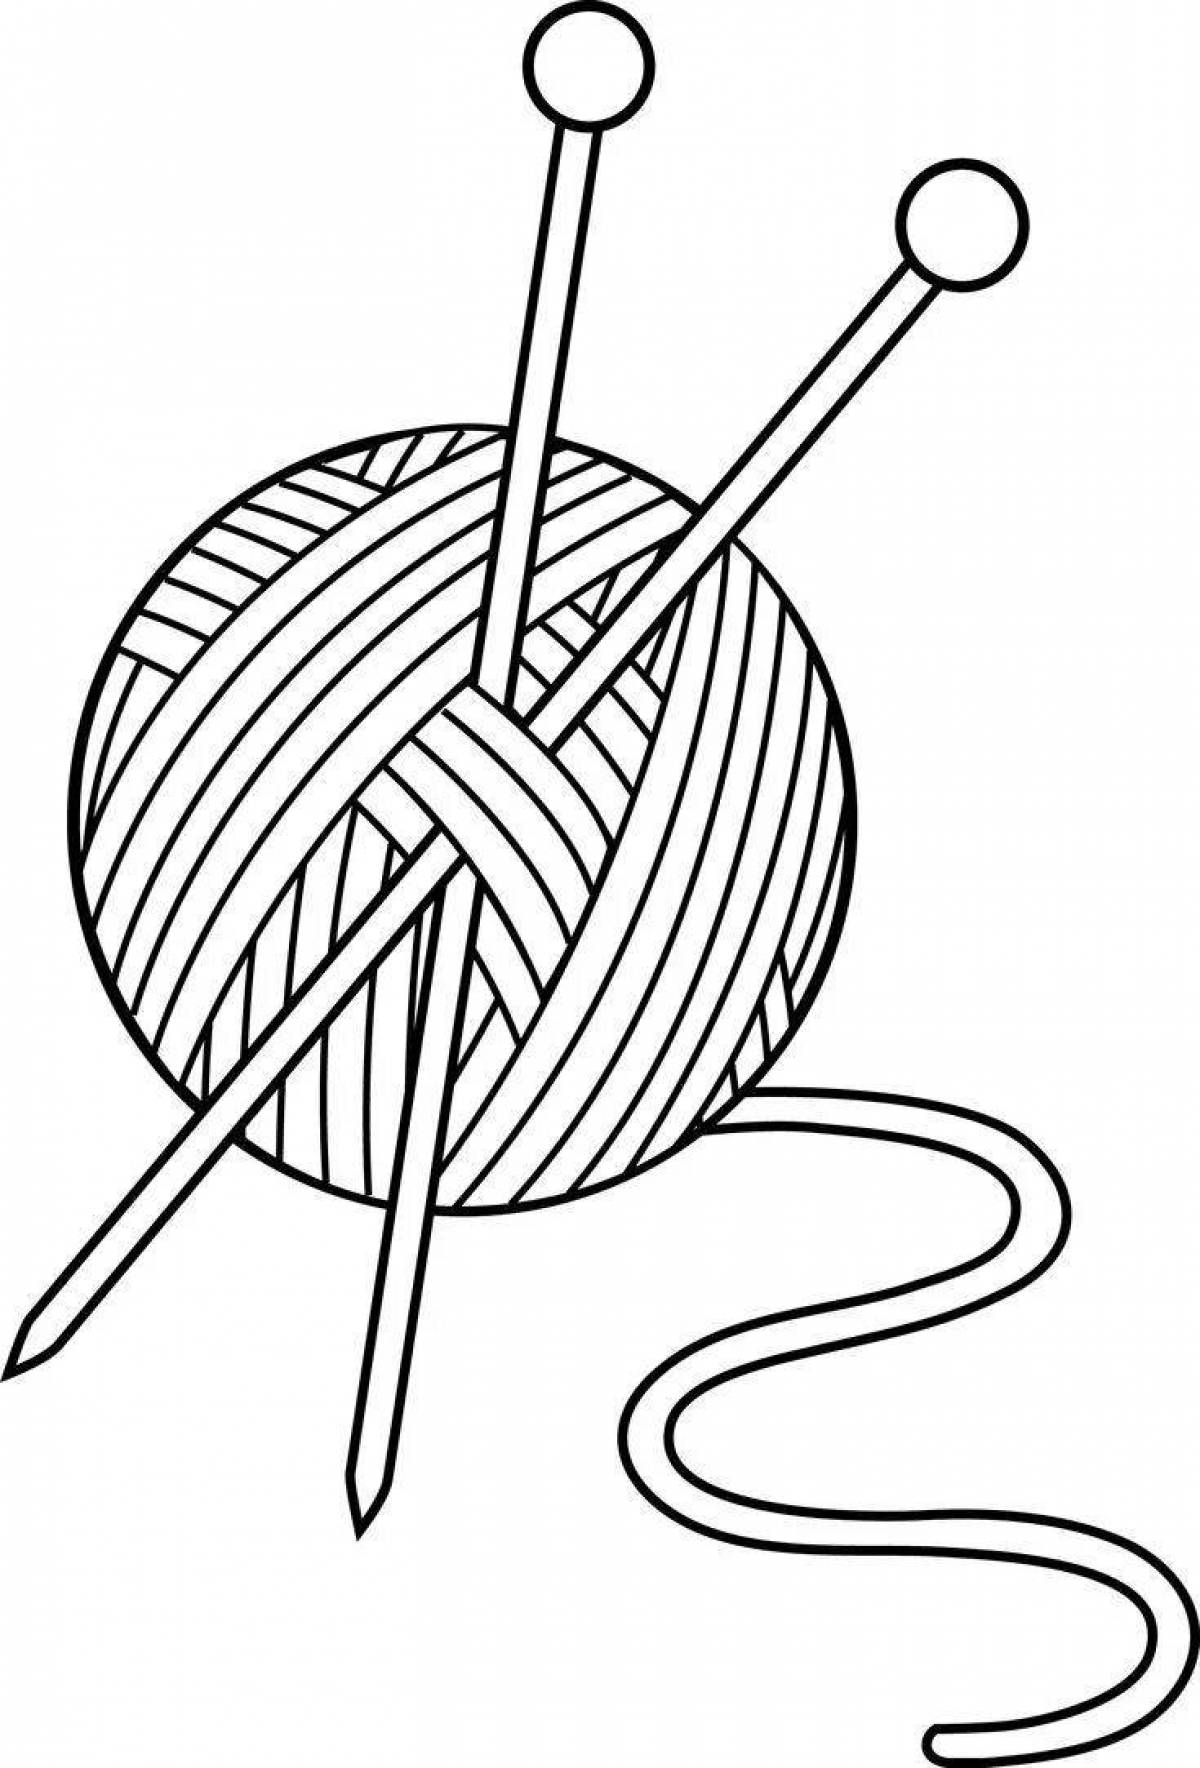 Glowing ball of thread coloring page